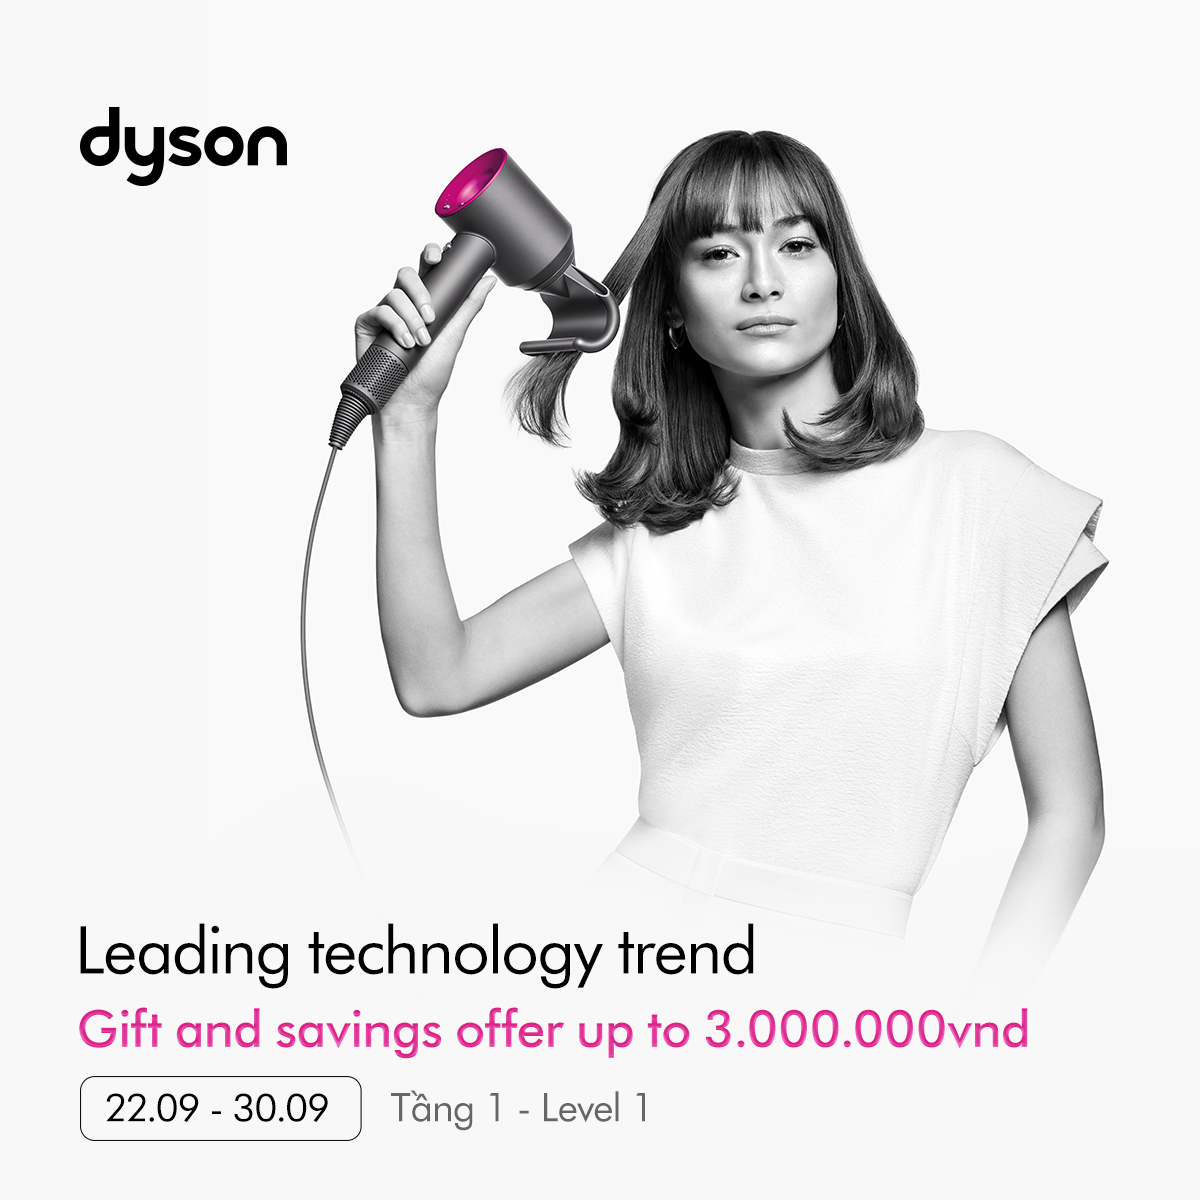 📣 LEADING THE TECHNOLOGY TREND - GIFT UP TO VND 3,000,000 DISCOUNT FROM DYSON! 📣